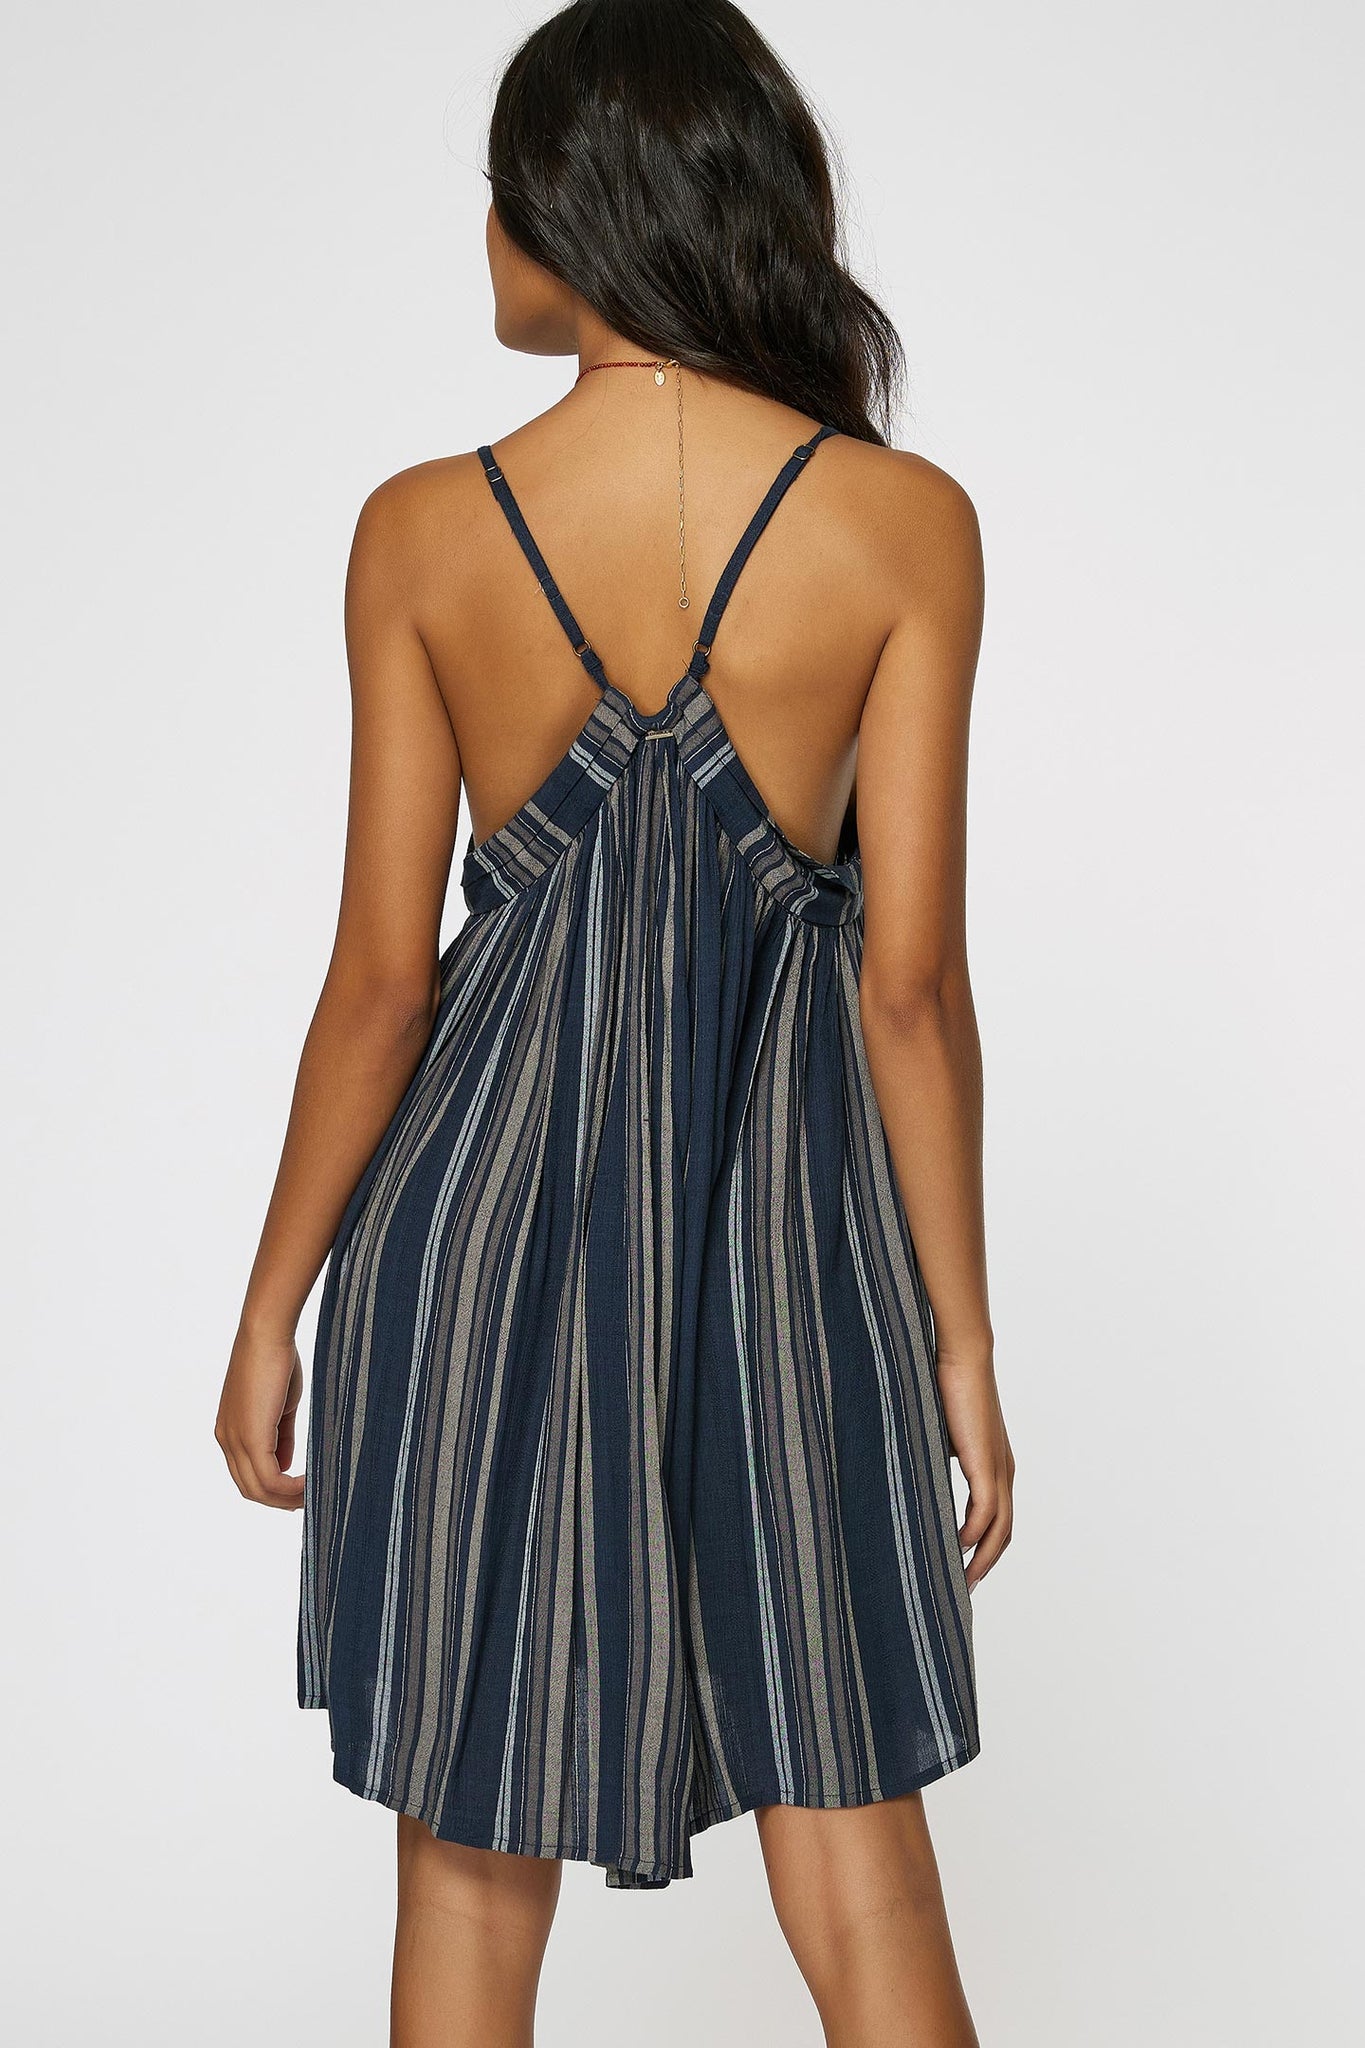 SALTWATER SOLIDS STRIPE TANK DRESS COVER-UP